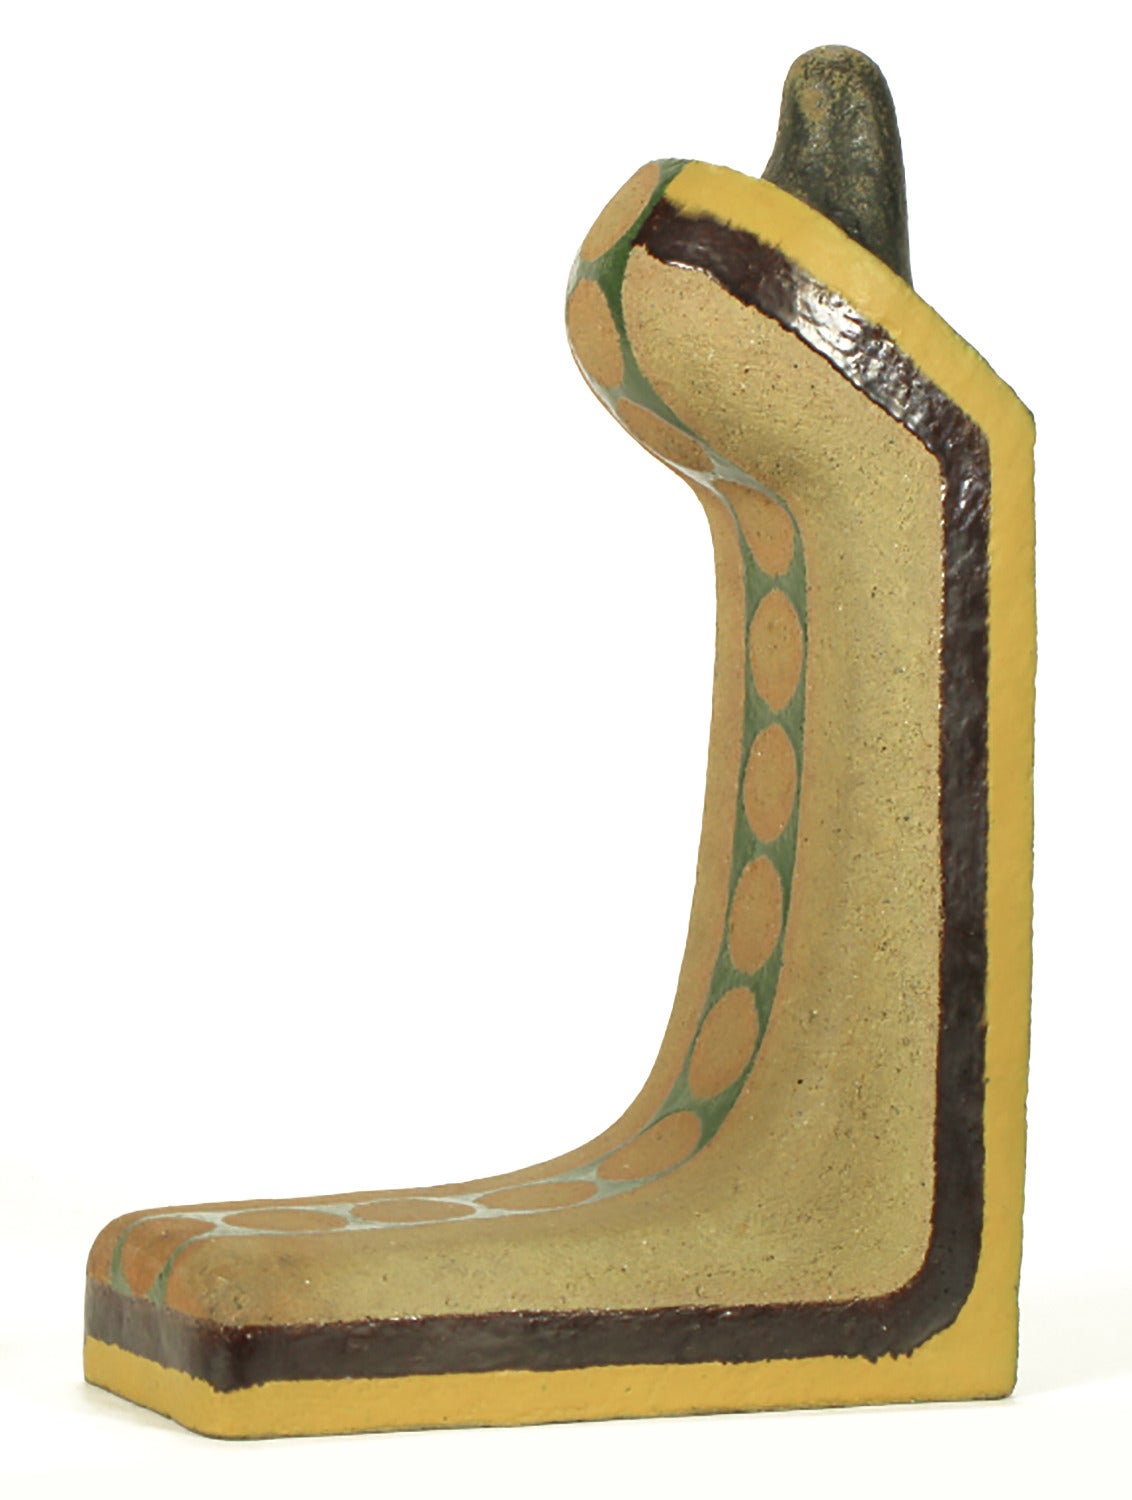 Abstract ceramic sculpture in parcel glazed finish of brown and yellow border with center dotted open green band. Reverse side features an organic top element that is glazed dark green. 

From the estate of William August Hoffman, a professor of